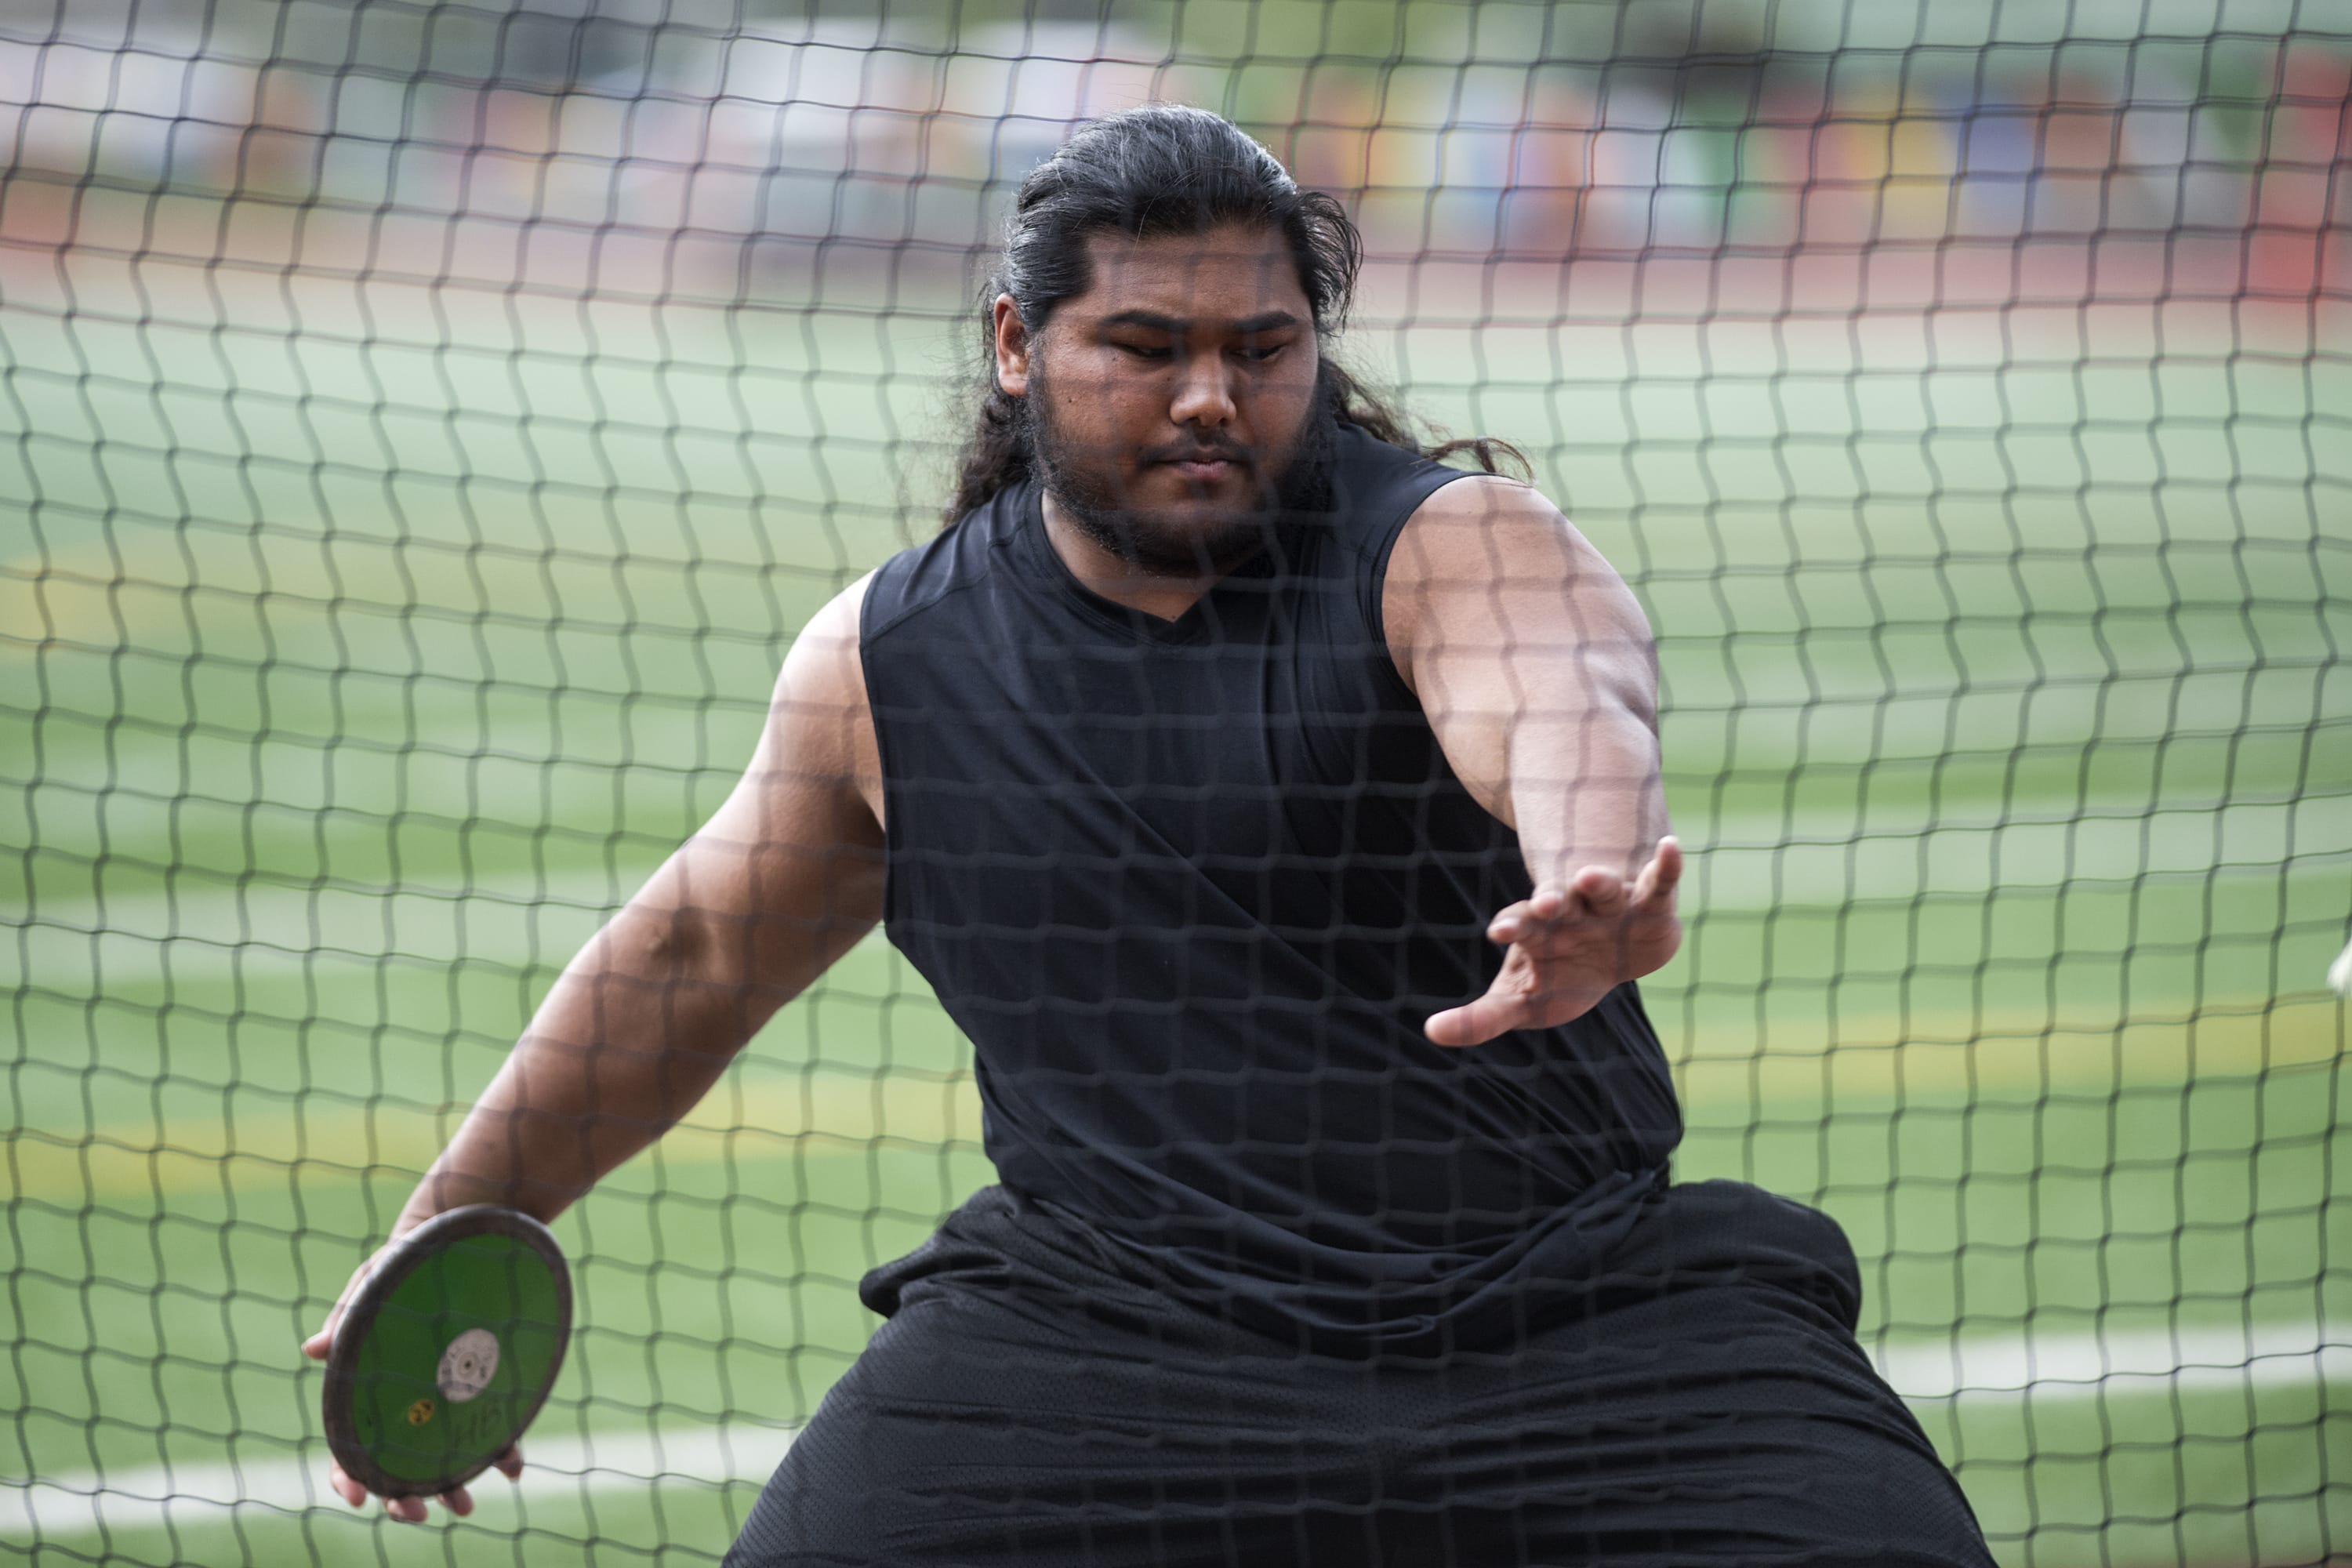 Hudson's Bay's Angel Terry winds up for a throw during the discus at the second day of the 4A, 3A district track and field meet at McKenzie Stadium in Vancouver on Thursday, May 10, 2018.